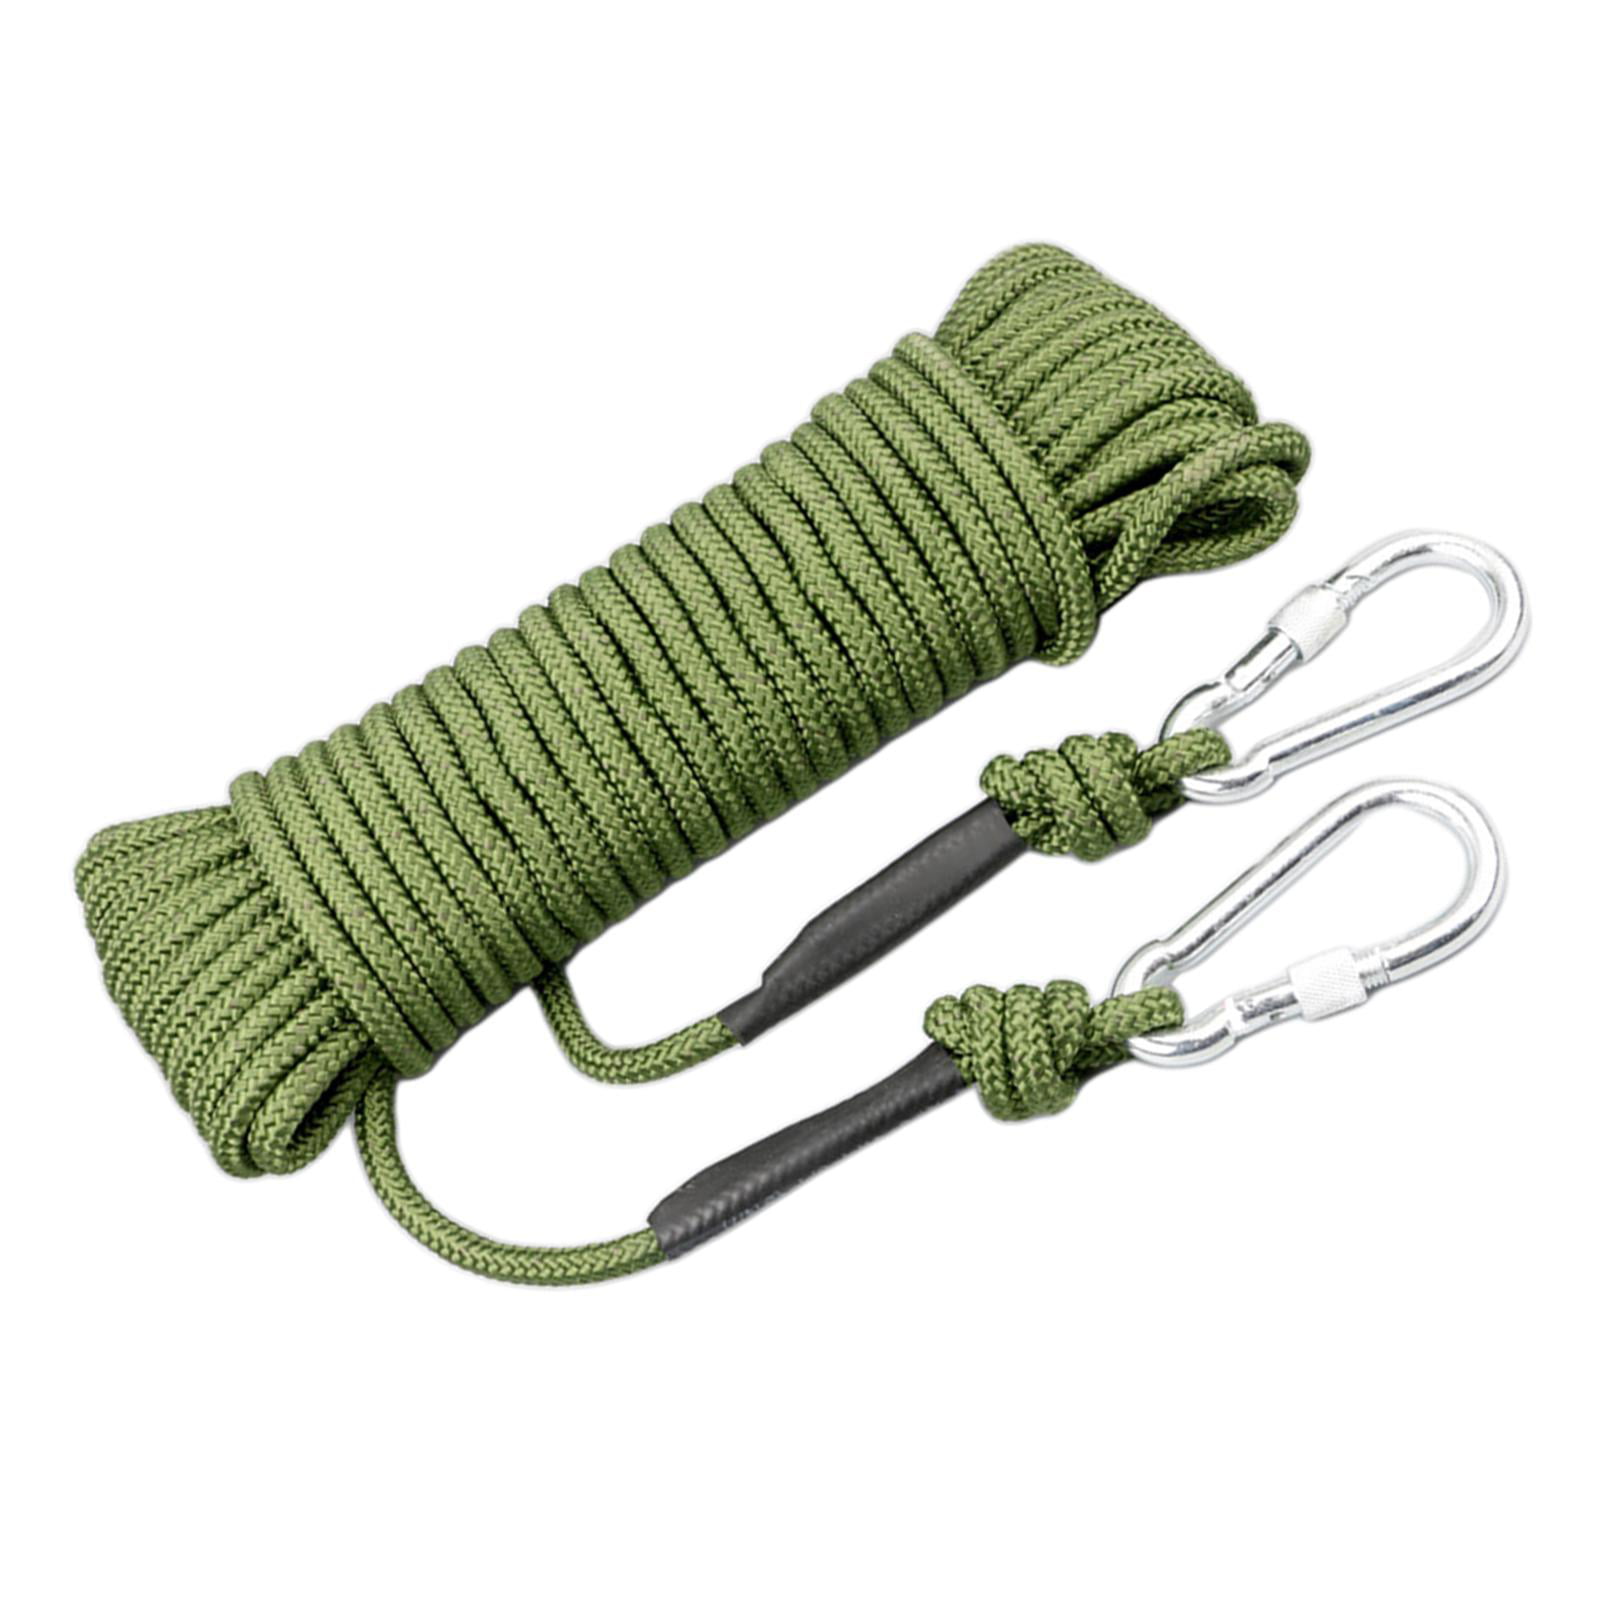 Details about   20M/64Ft Static Climbing Rope Escape Safety Abseiling Outdoor Survival Rescue 